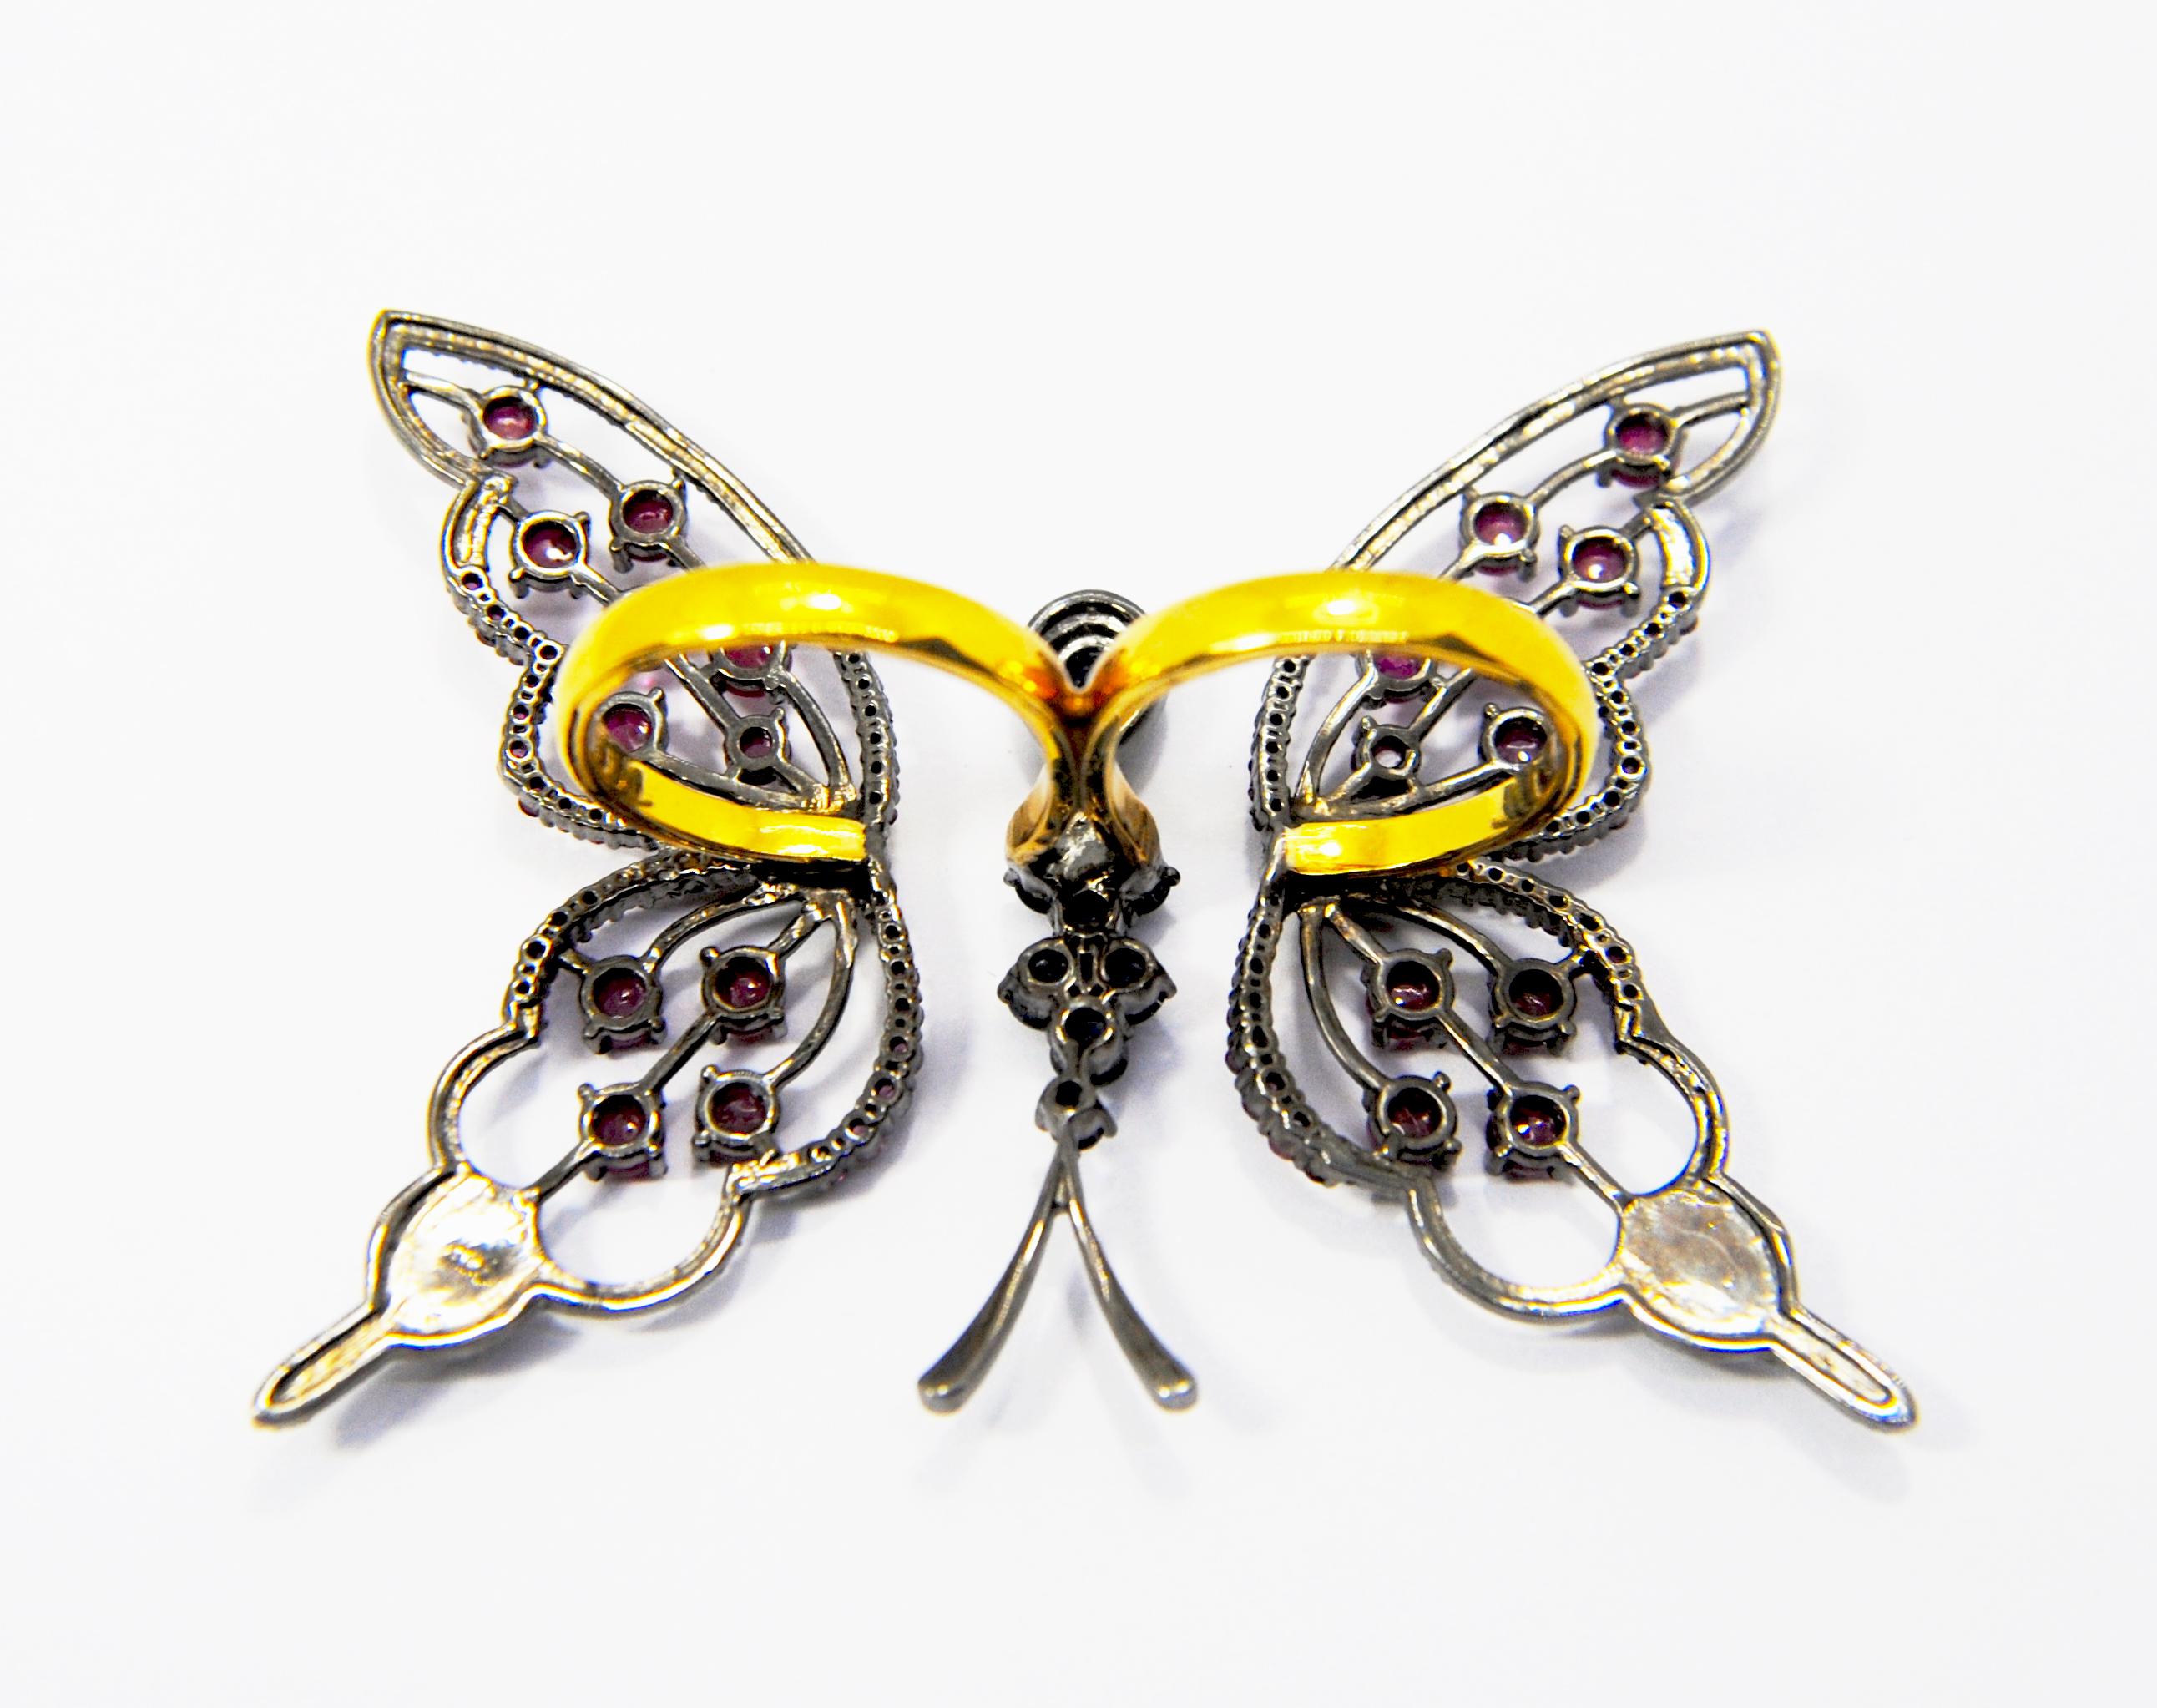 Irama Pradera is a Young designer from Spain that searches always for the best gems and combines classic with contemporary mounting and styles. 
Sleekly crafted in 18K yellow gold these romantic and sophisticated double articulated butterfly ring